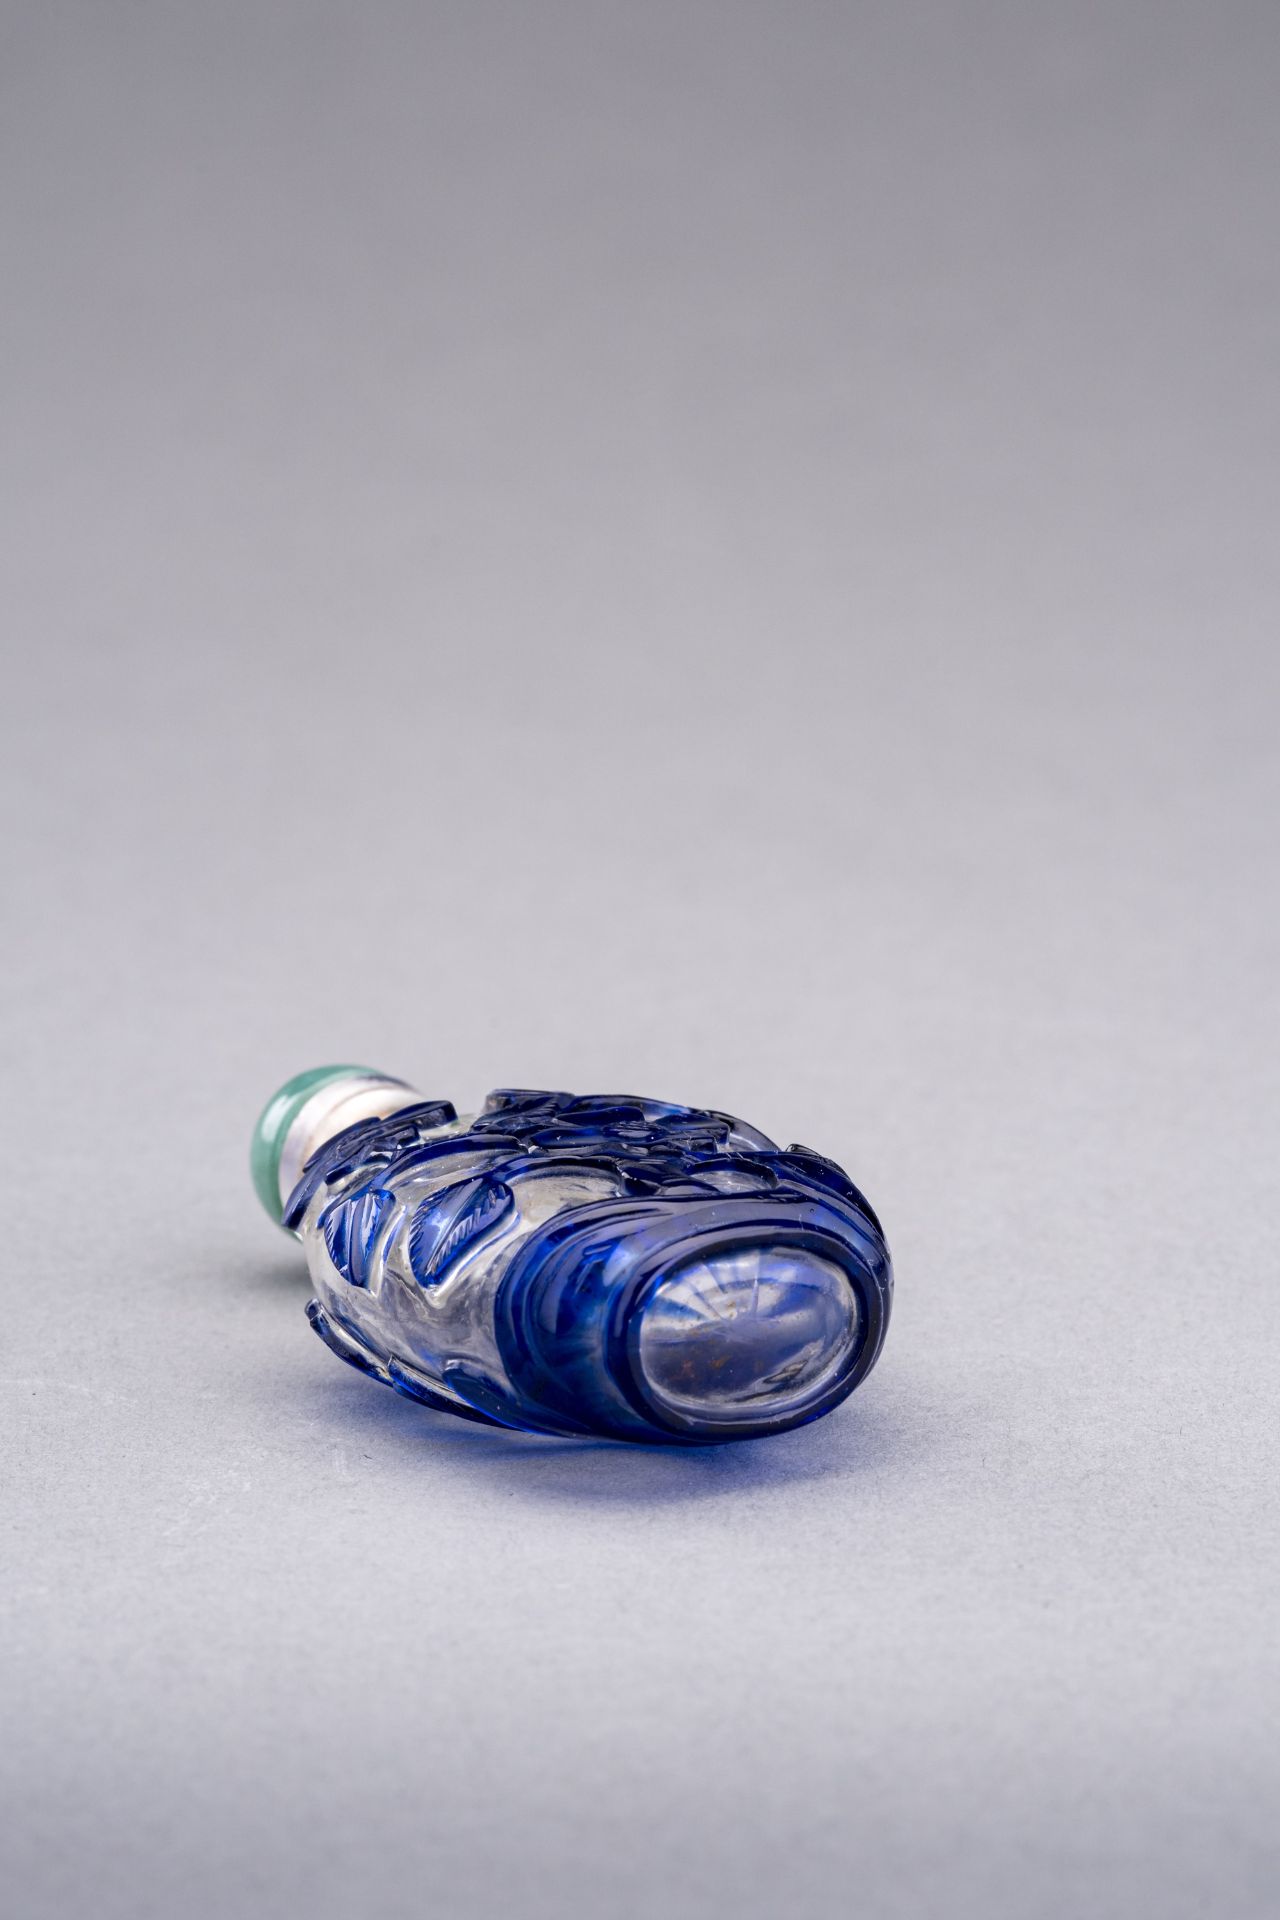 A SAPPHIRE-BLUE OVERLAY GLASS SNUFF BOTTLE, QING DYNASTY - Image 6 of 6